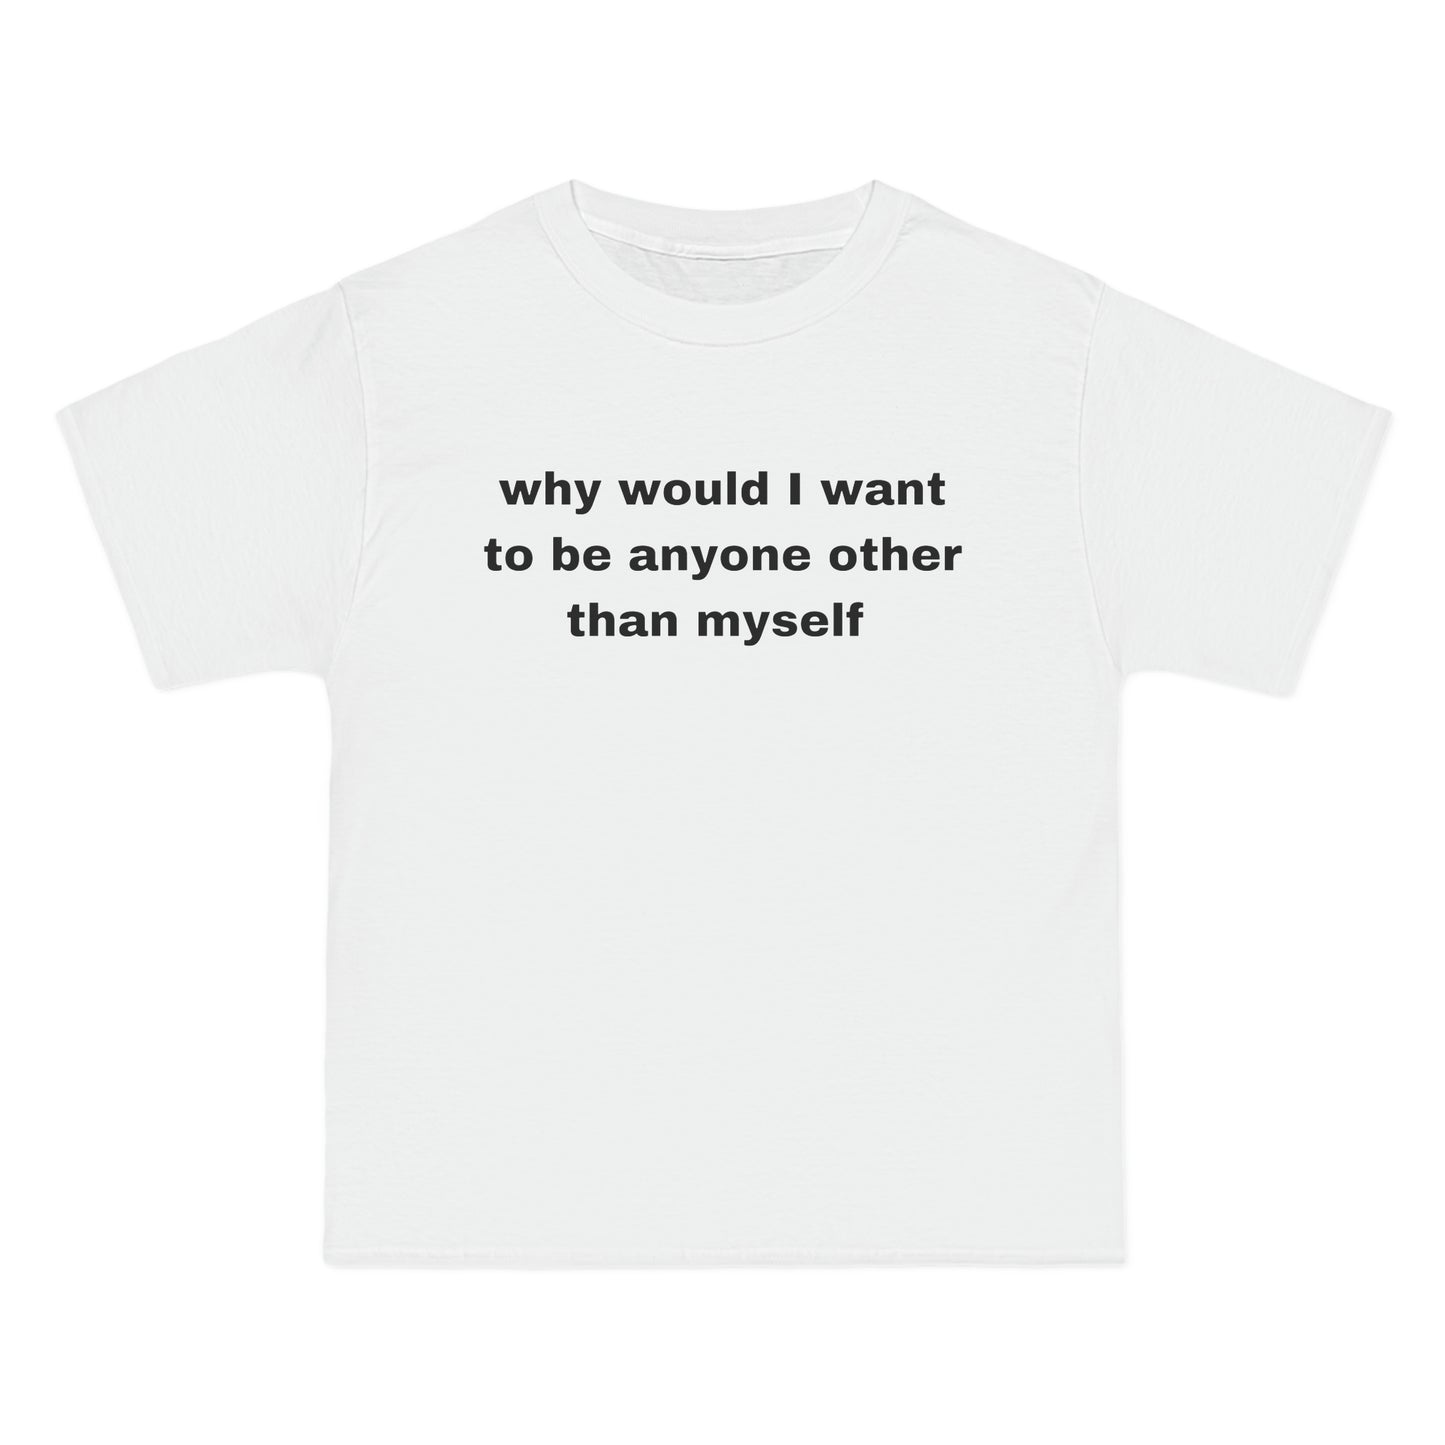 why would i want to be anyone other than myself Tee